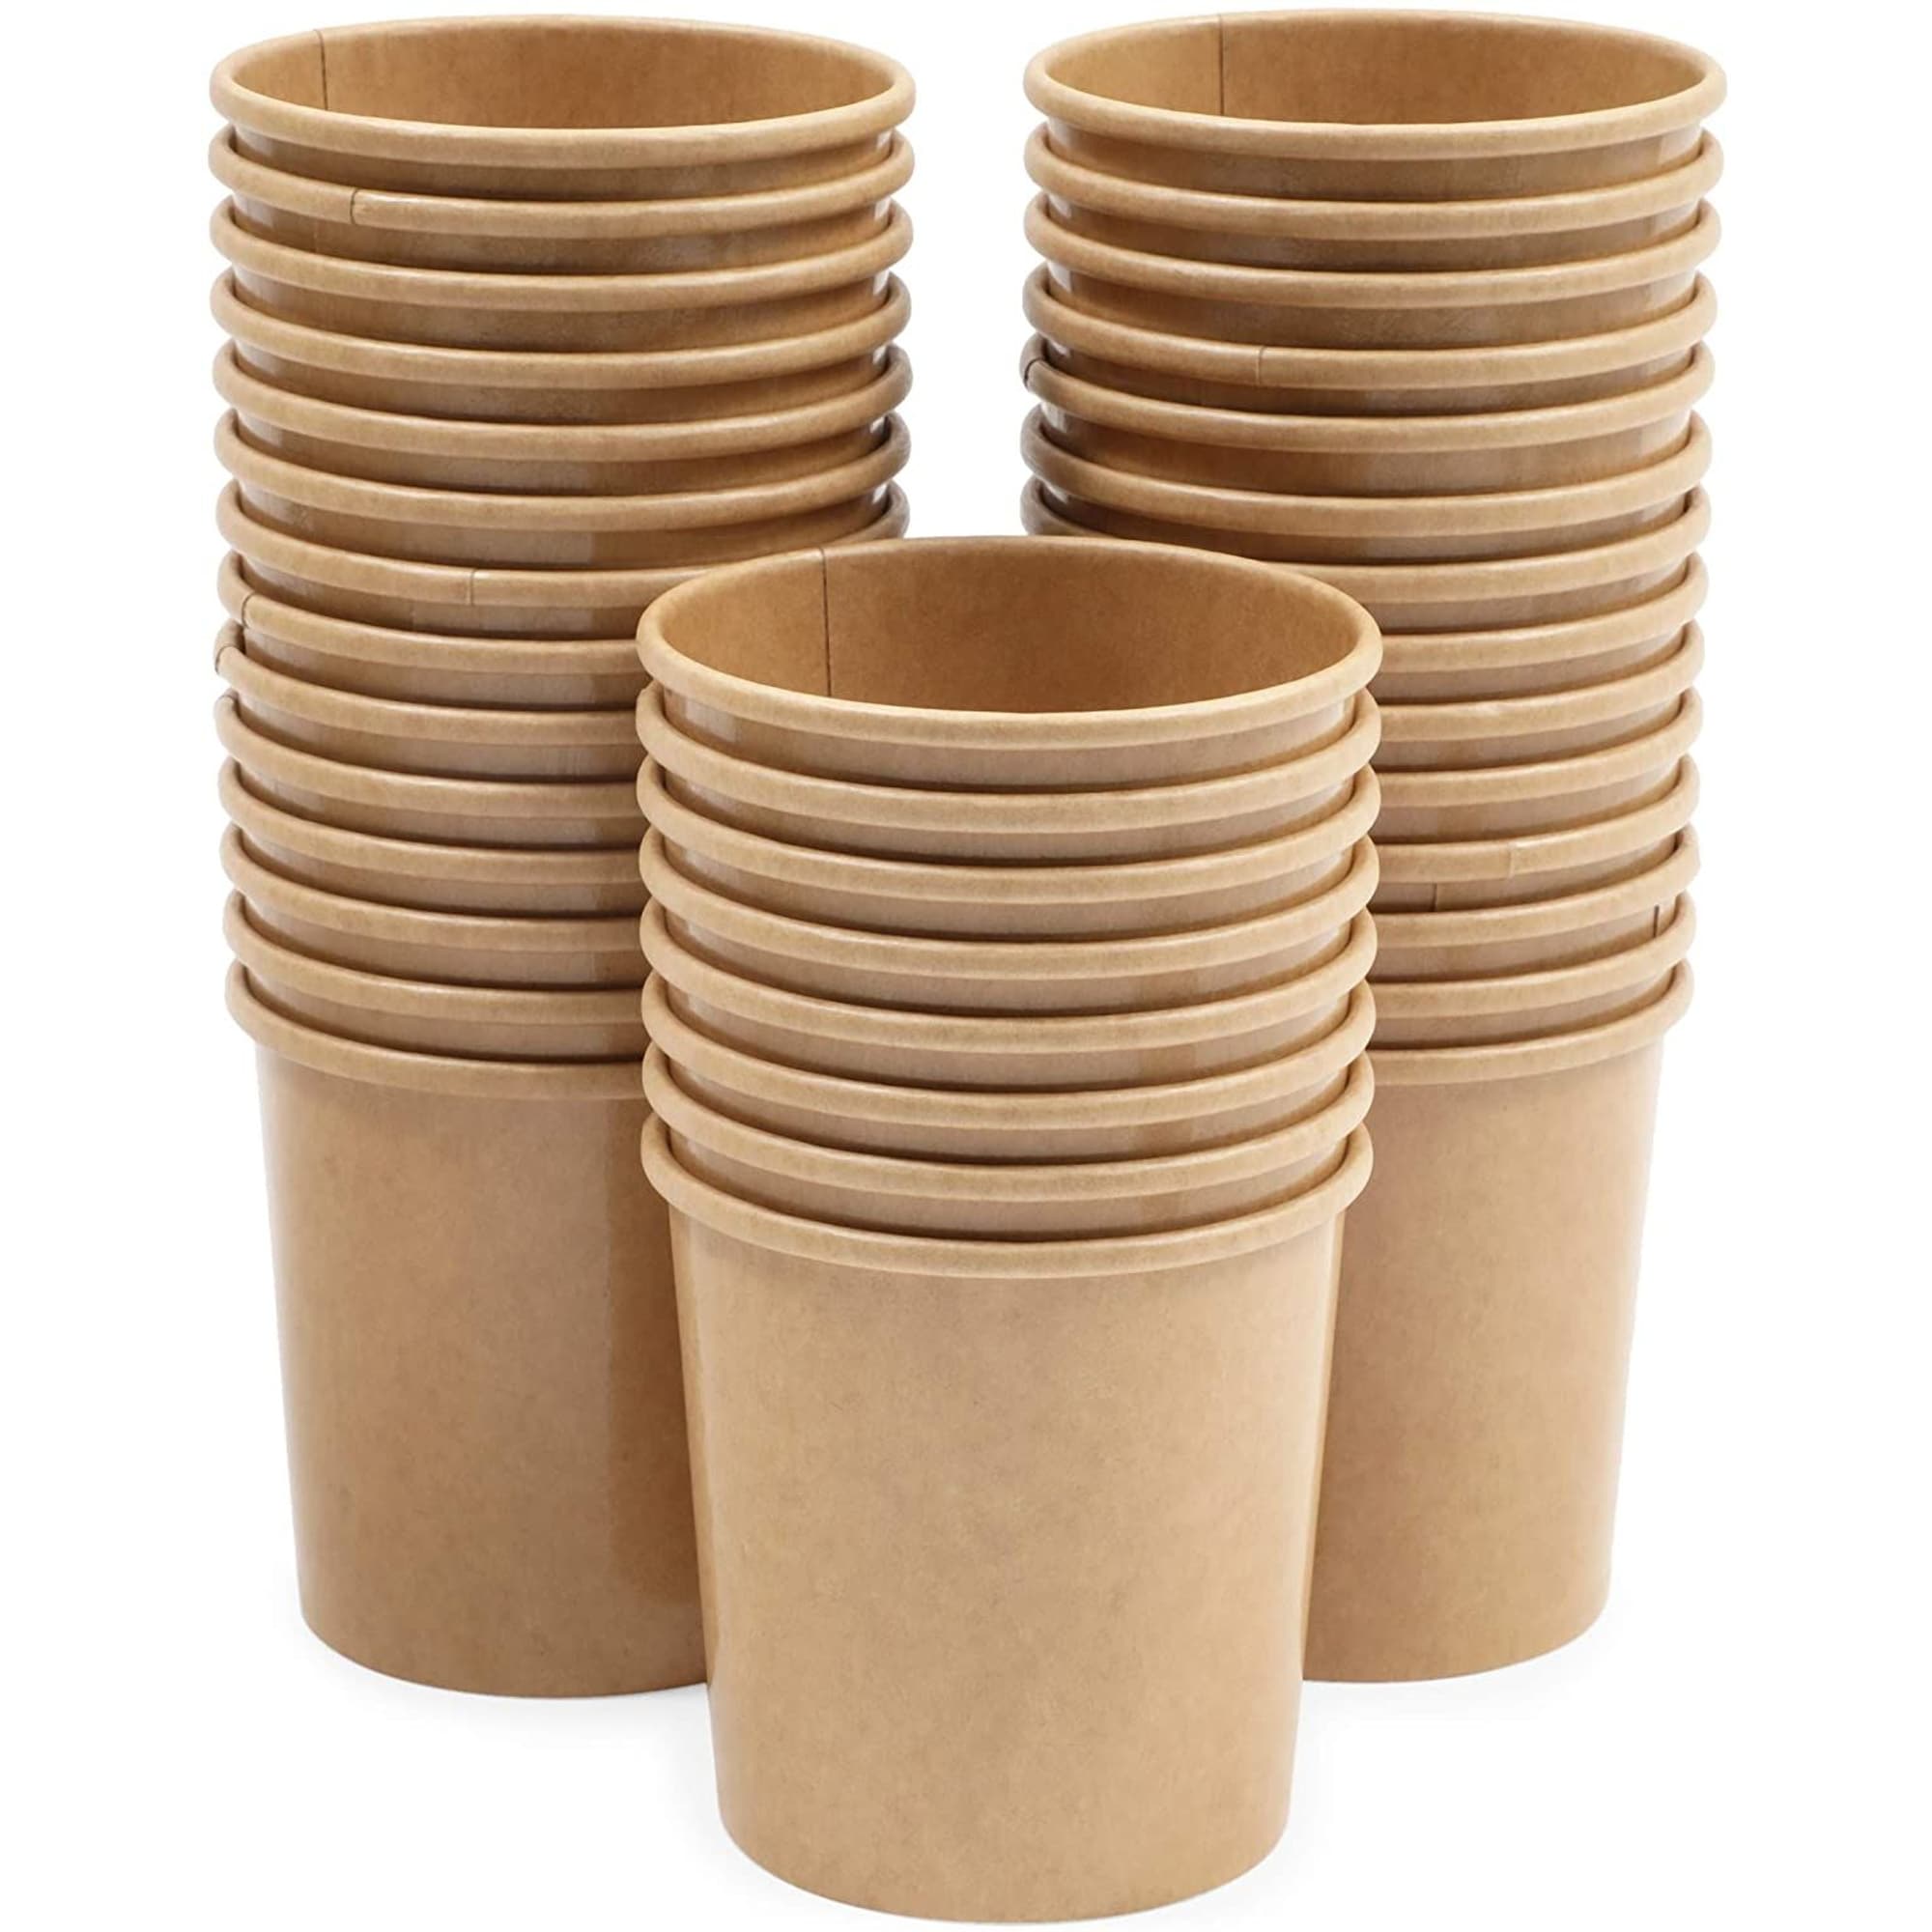 16 oz To Go Soup Containers with Lids, Disposable Paper Bowls (36 Pack) -  Orange - On Sale - Bed Bath & Beyond - 35995967